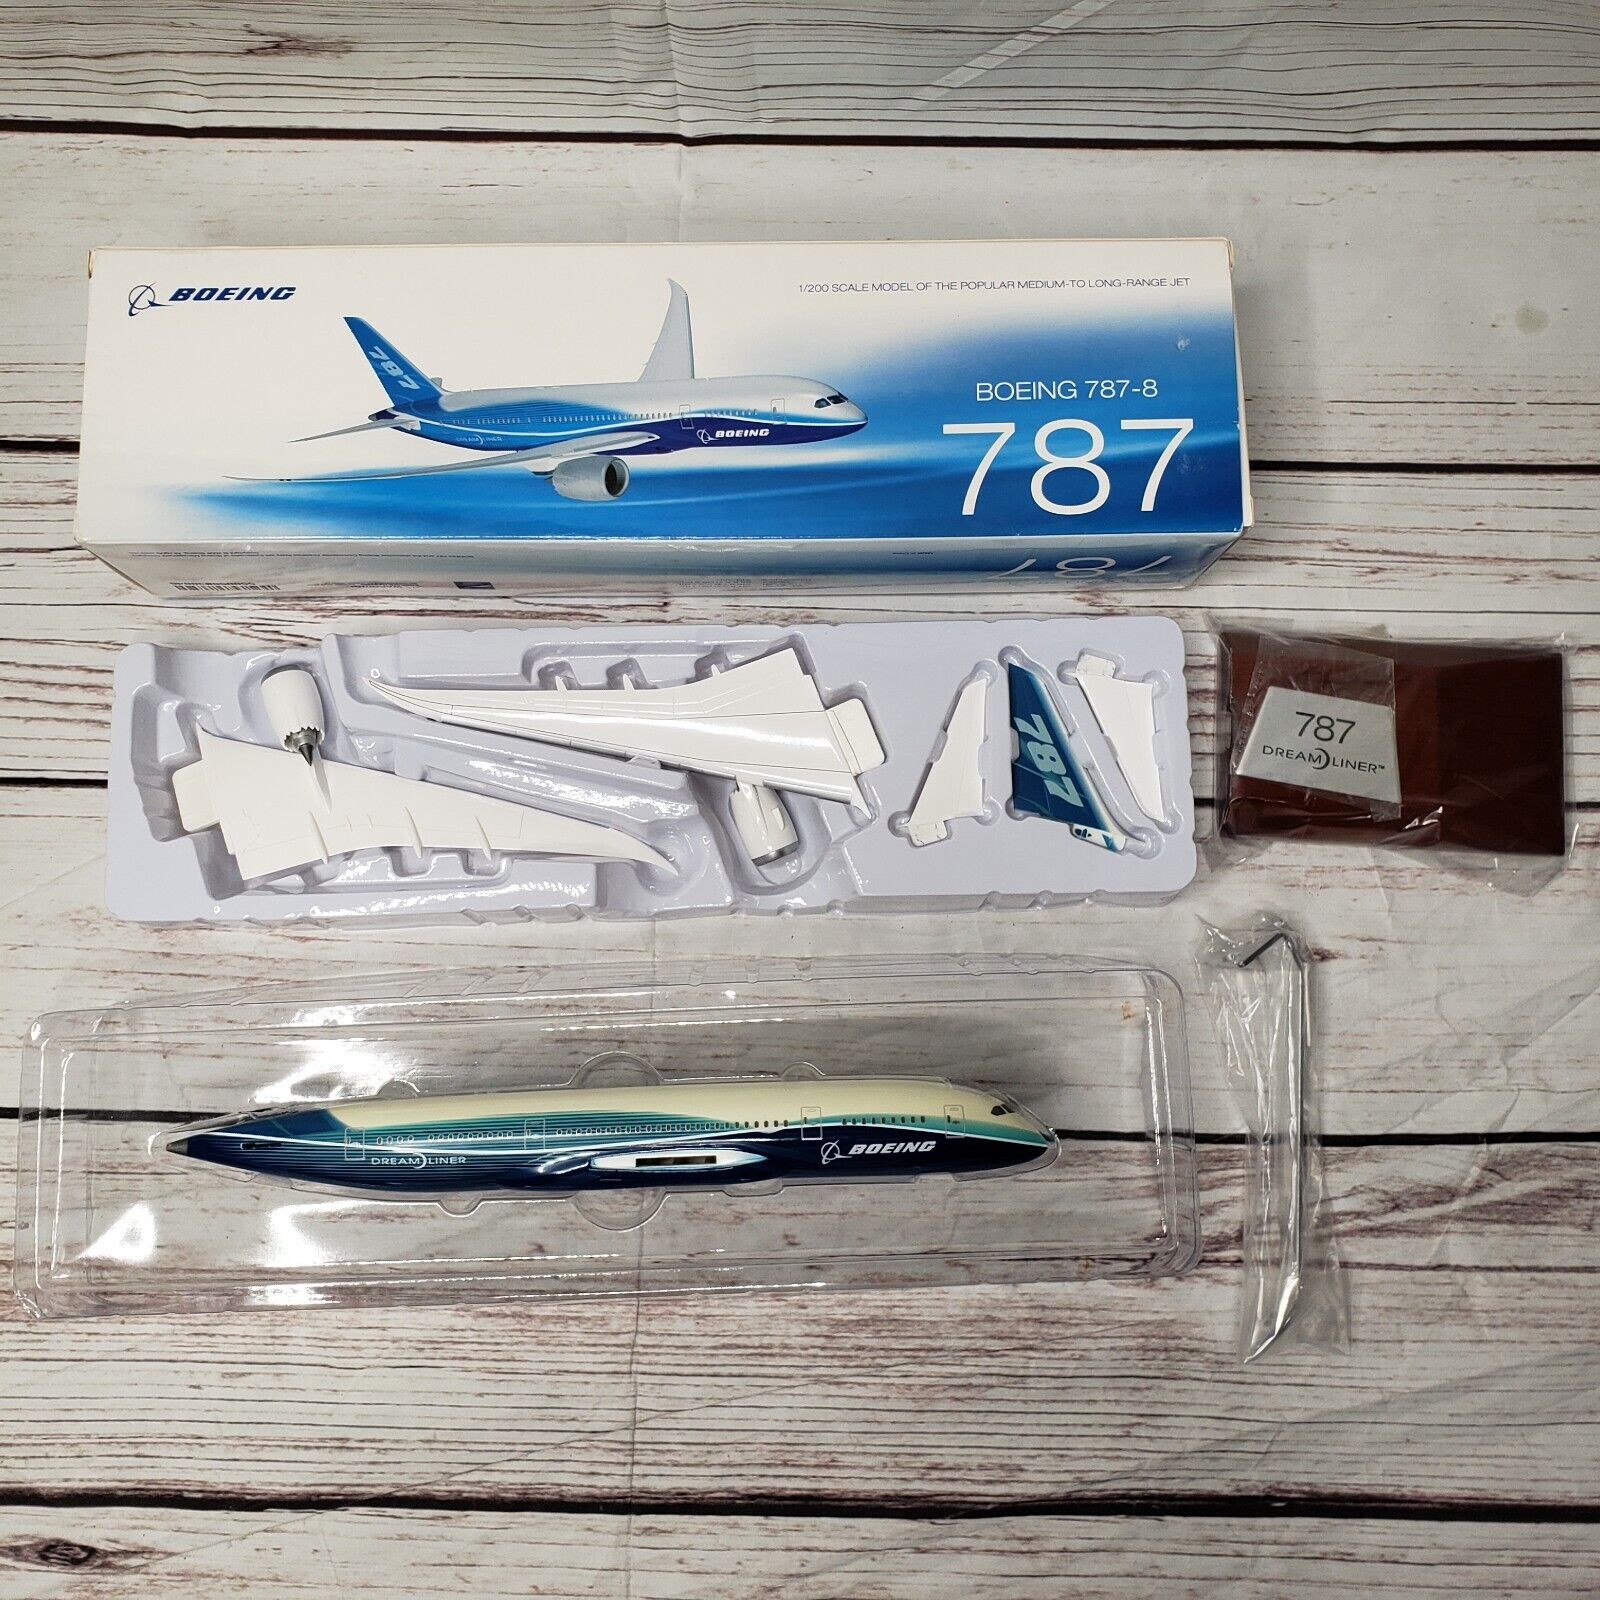 NEW BOEING Model Air Plane Craft Kit 787-8 1:200 Dreamliner airplane aircraft